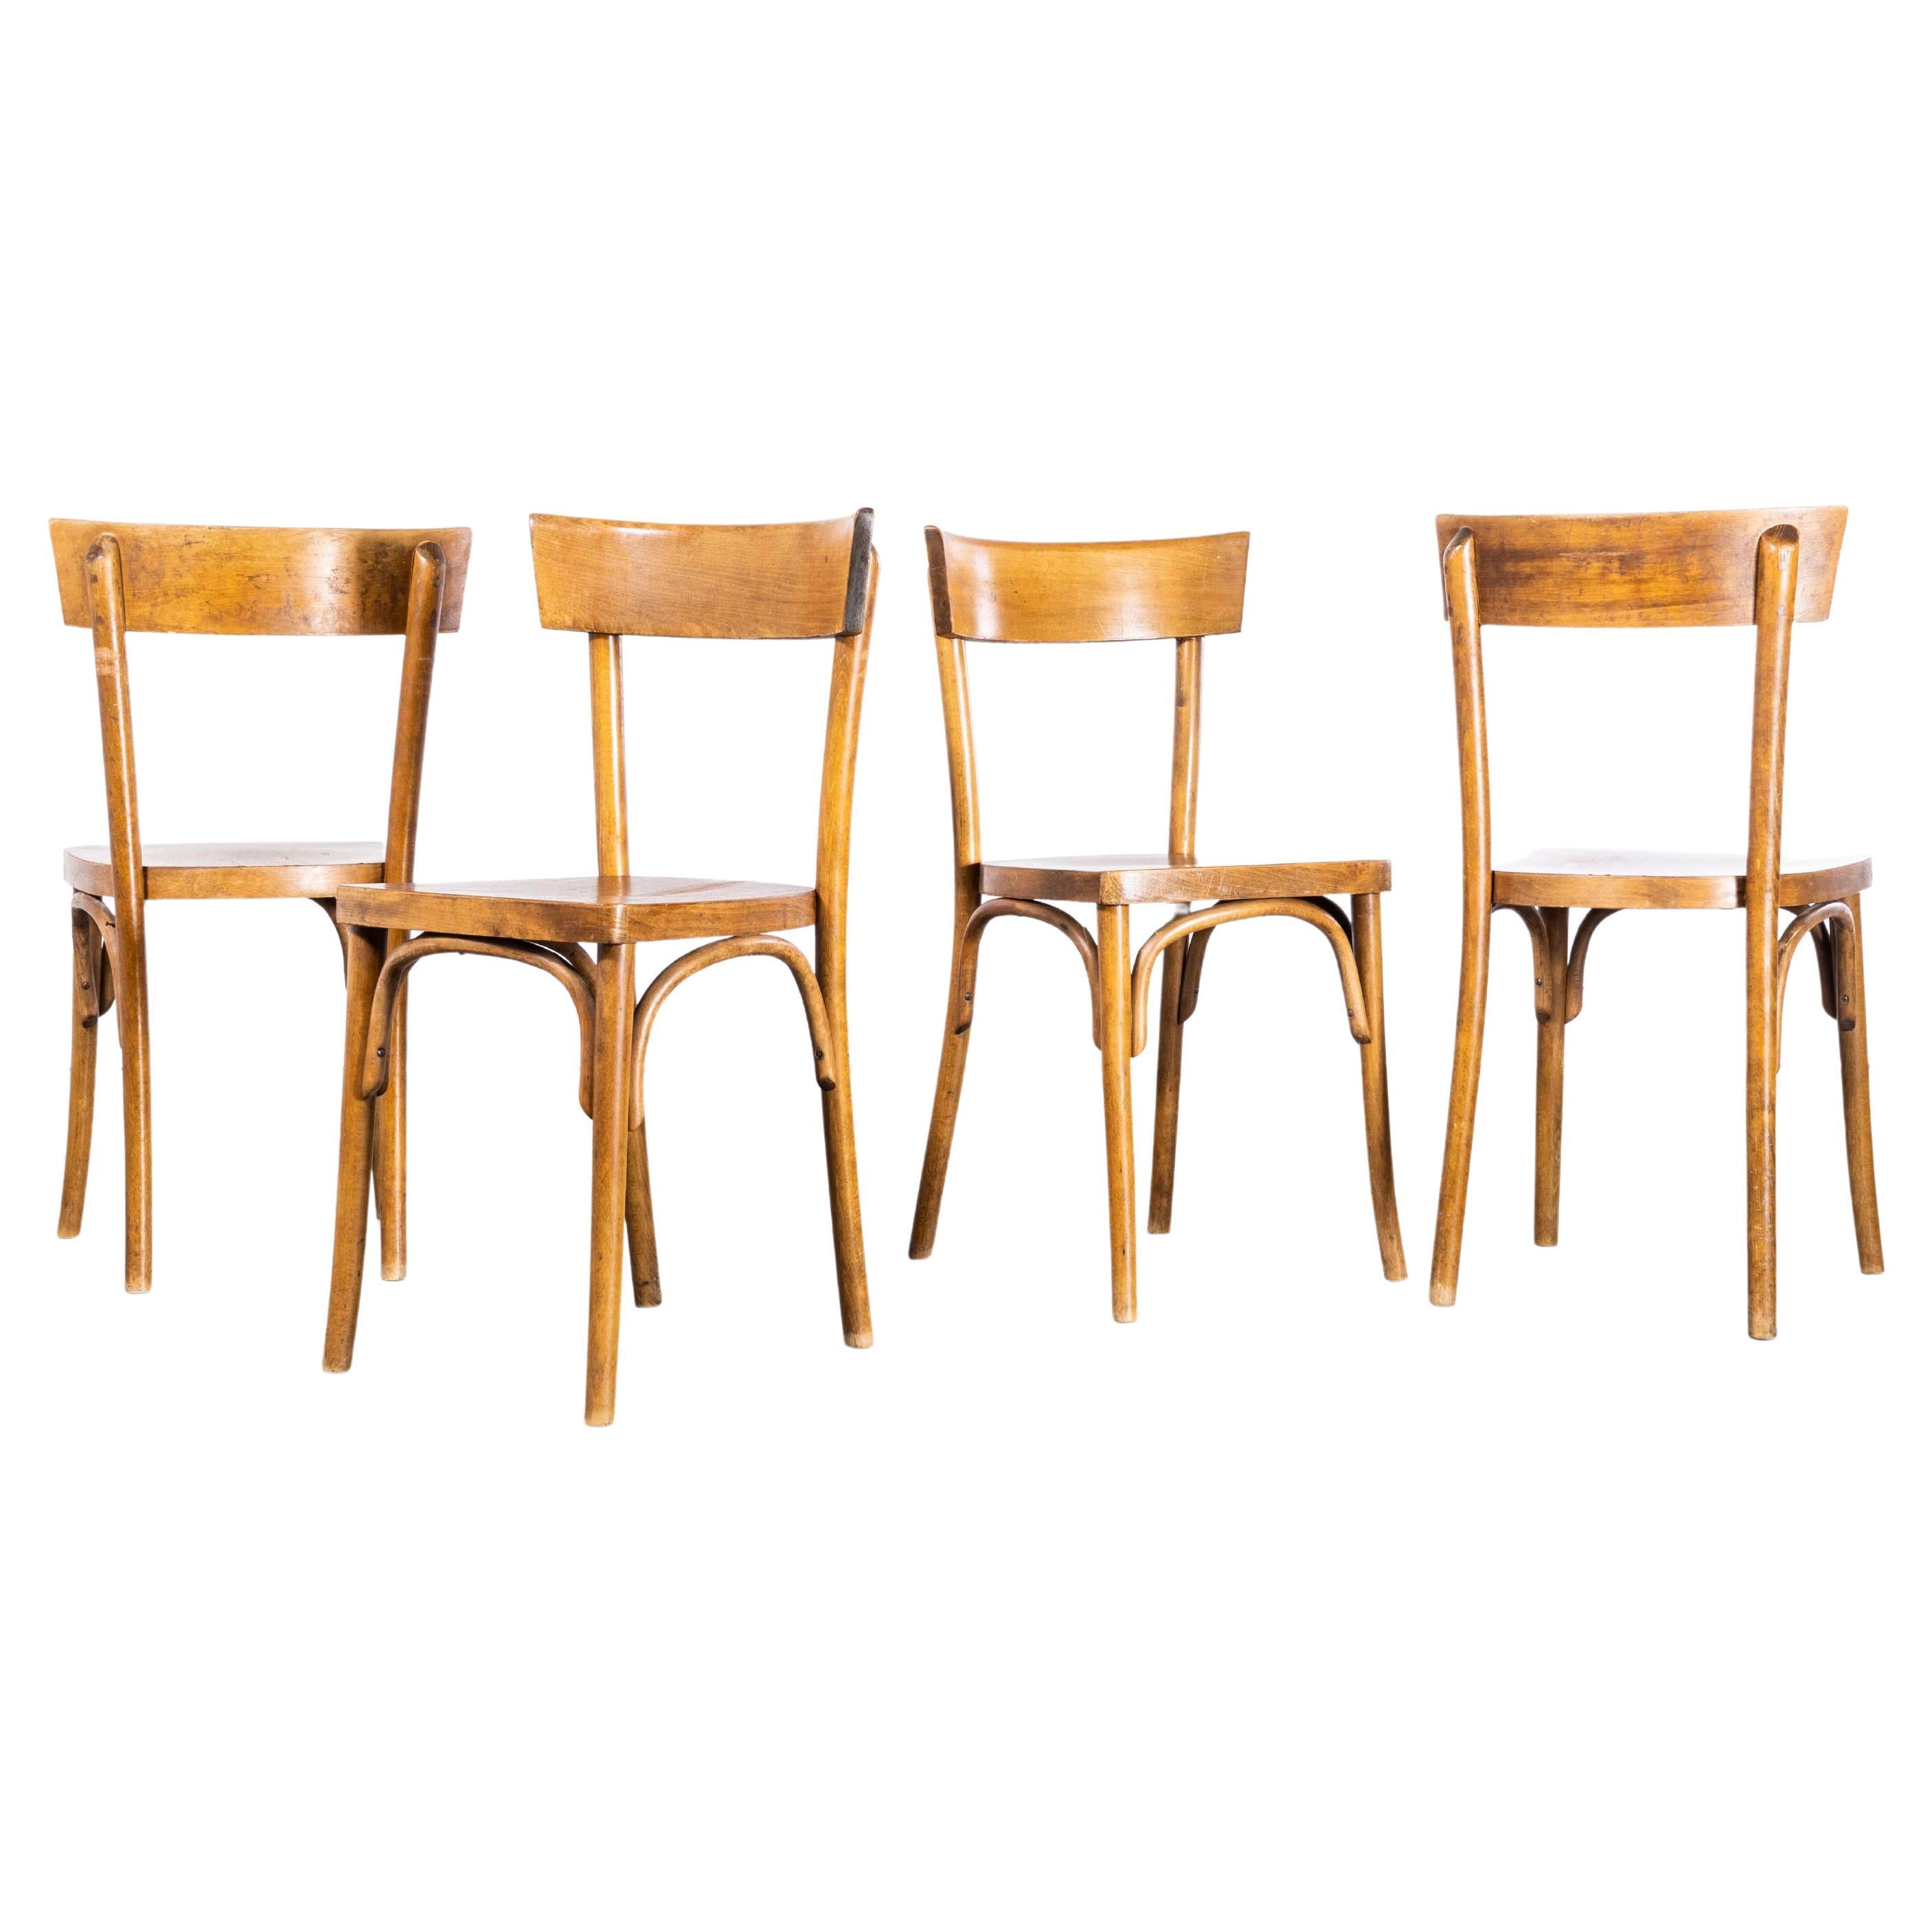 1950s Bentwood Mid Tan Single Bar Back Dining Chairs – Set of Four '2582' For Sale